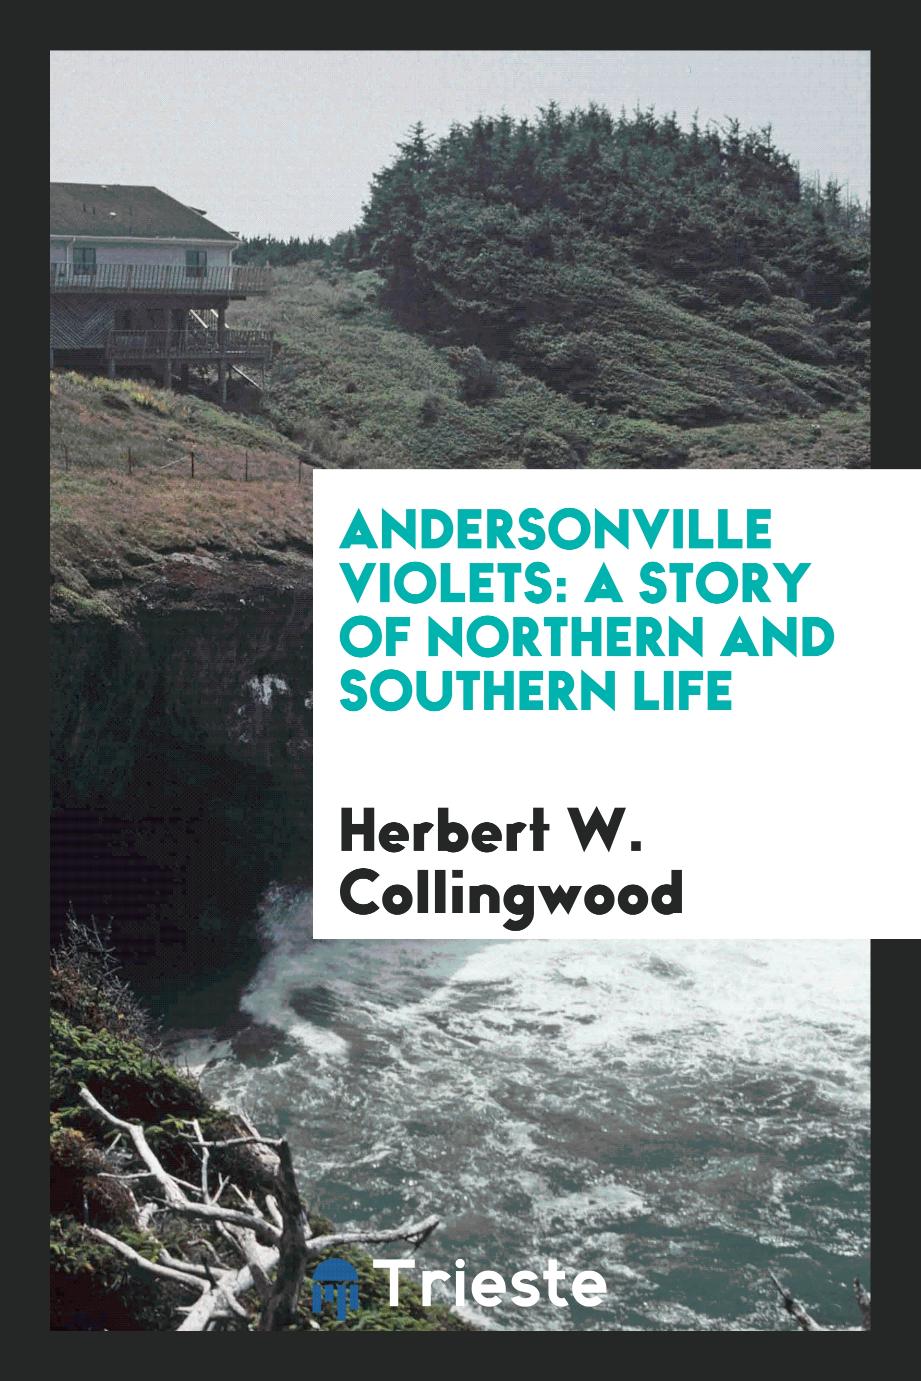 Andersonville violets: a story of northern and southern life